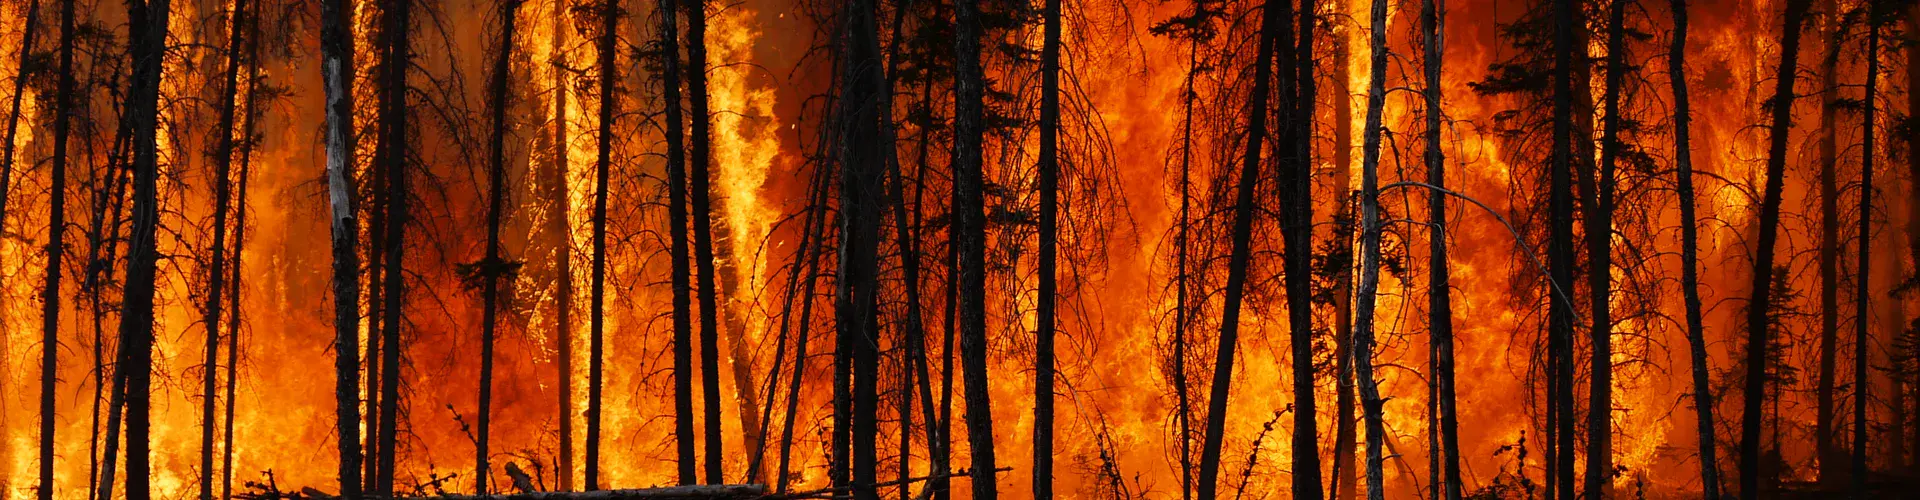 Boreal forest fire in Canada (Credit: Stefan Doerr via Imaggeo, CC BY-ND 3.0)